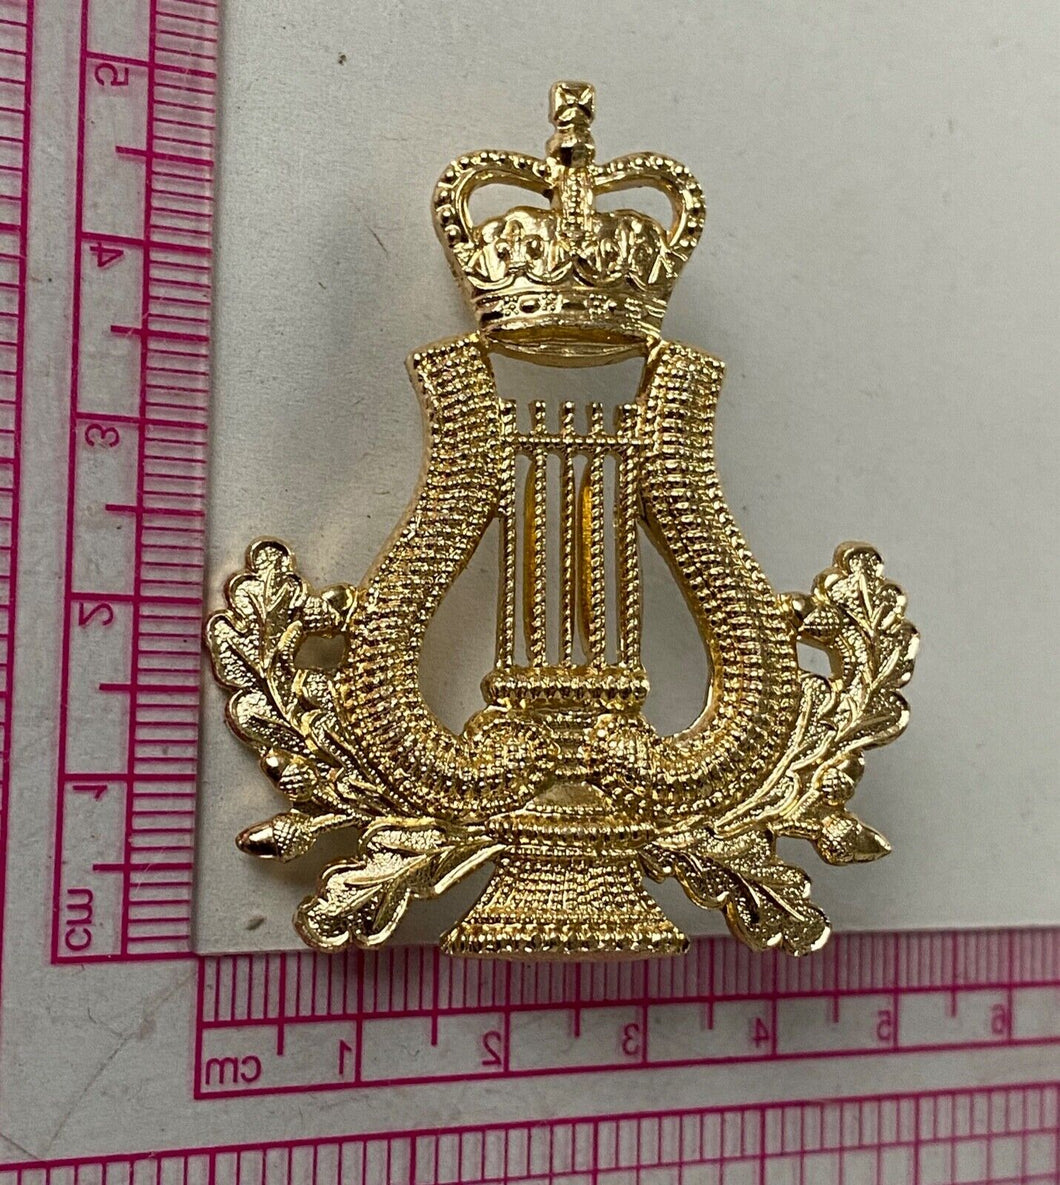 A Queens Crown British Army MUSICIAN'S staybrite cap badge - nice condition